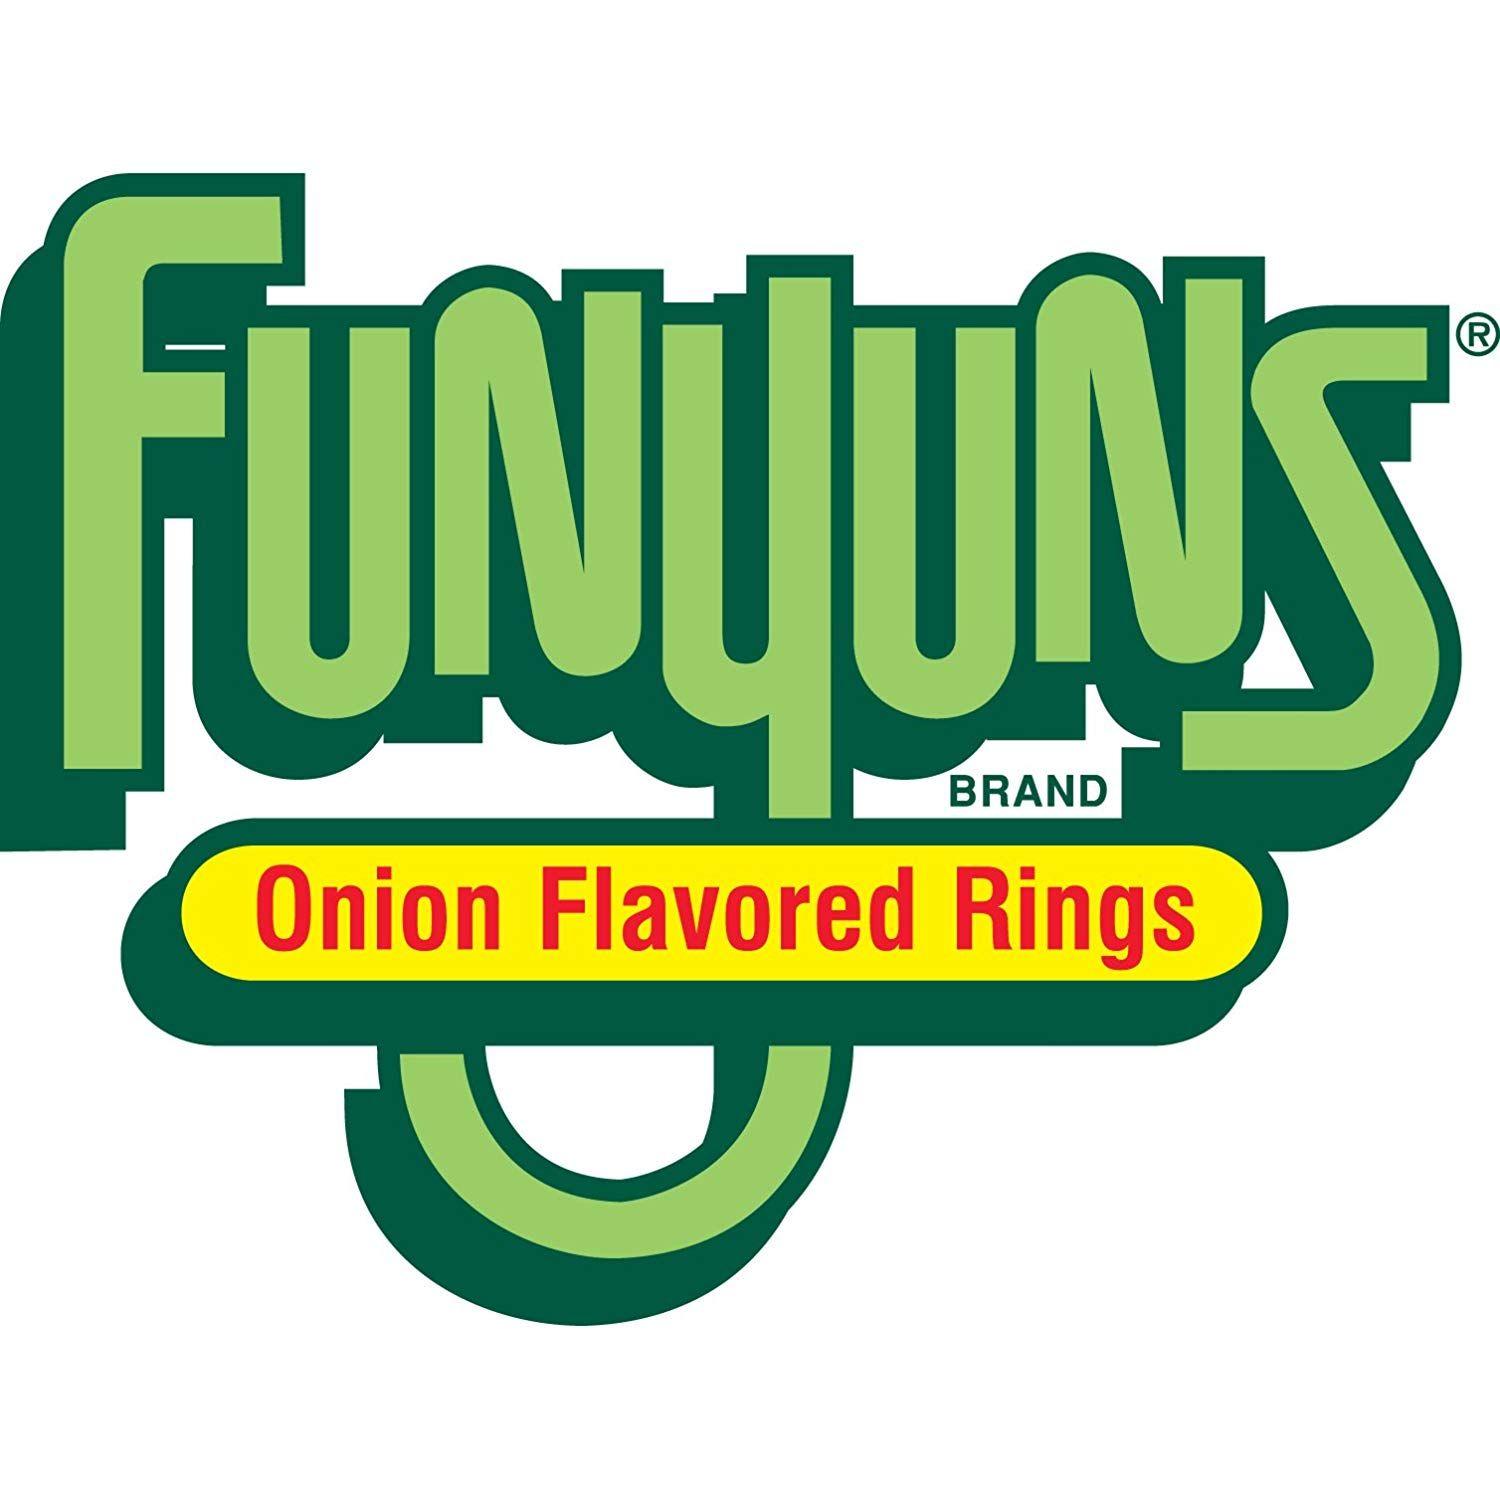 Funyuns Logo - Amazon.com : Funyuns Onion Flavored Rings.75 Ounce Pack of 40